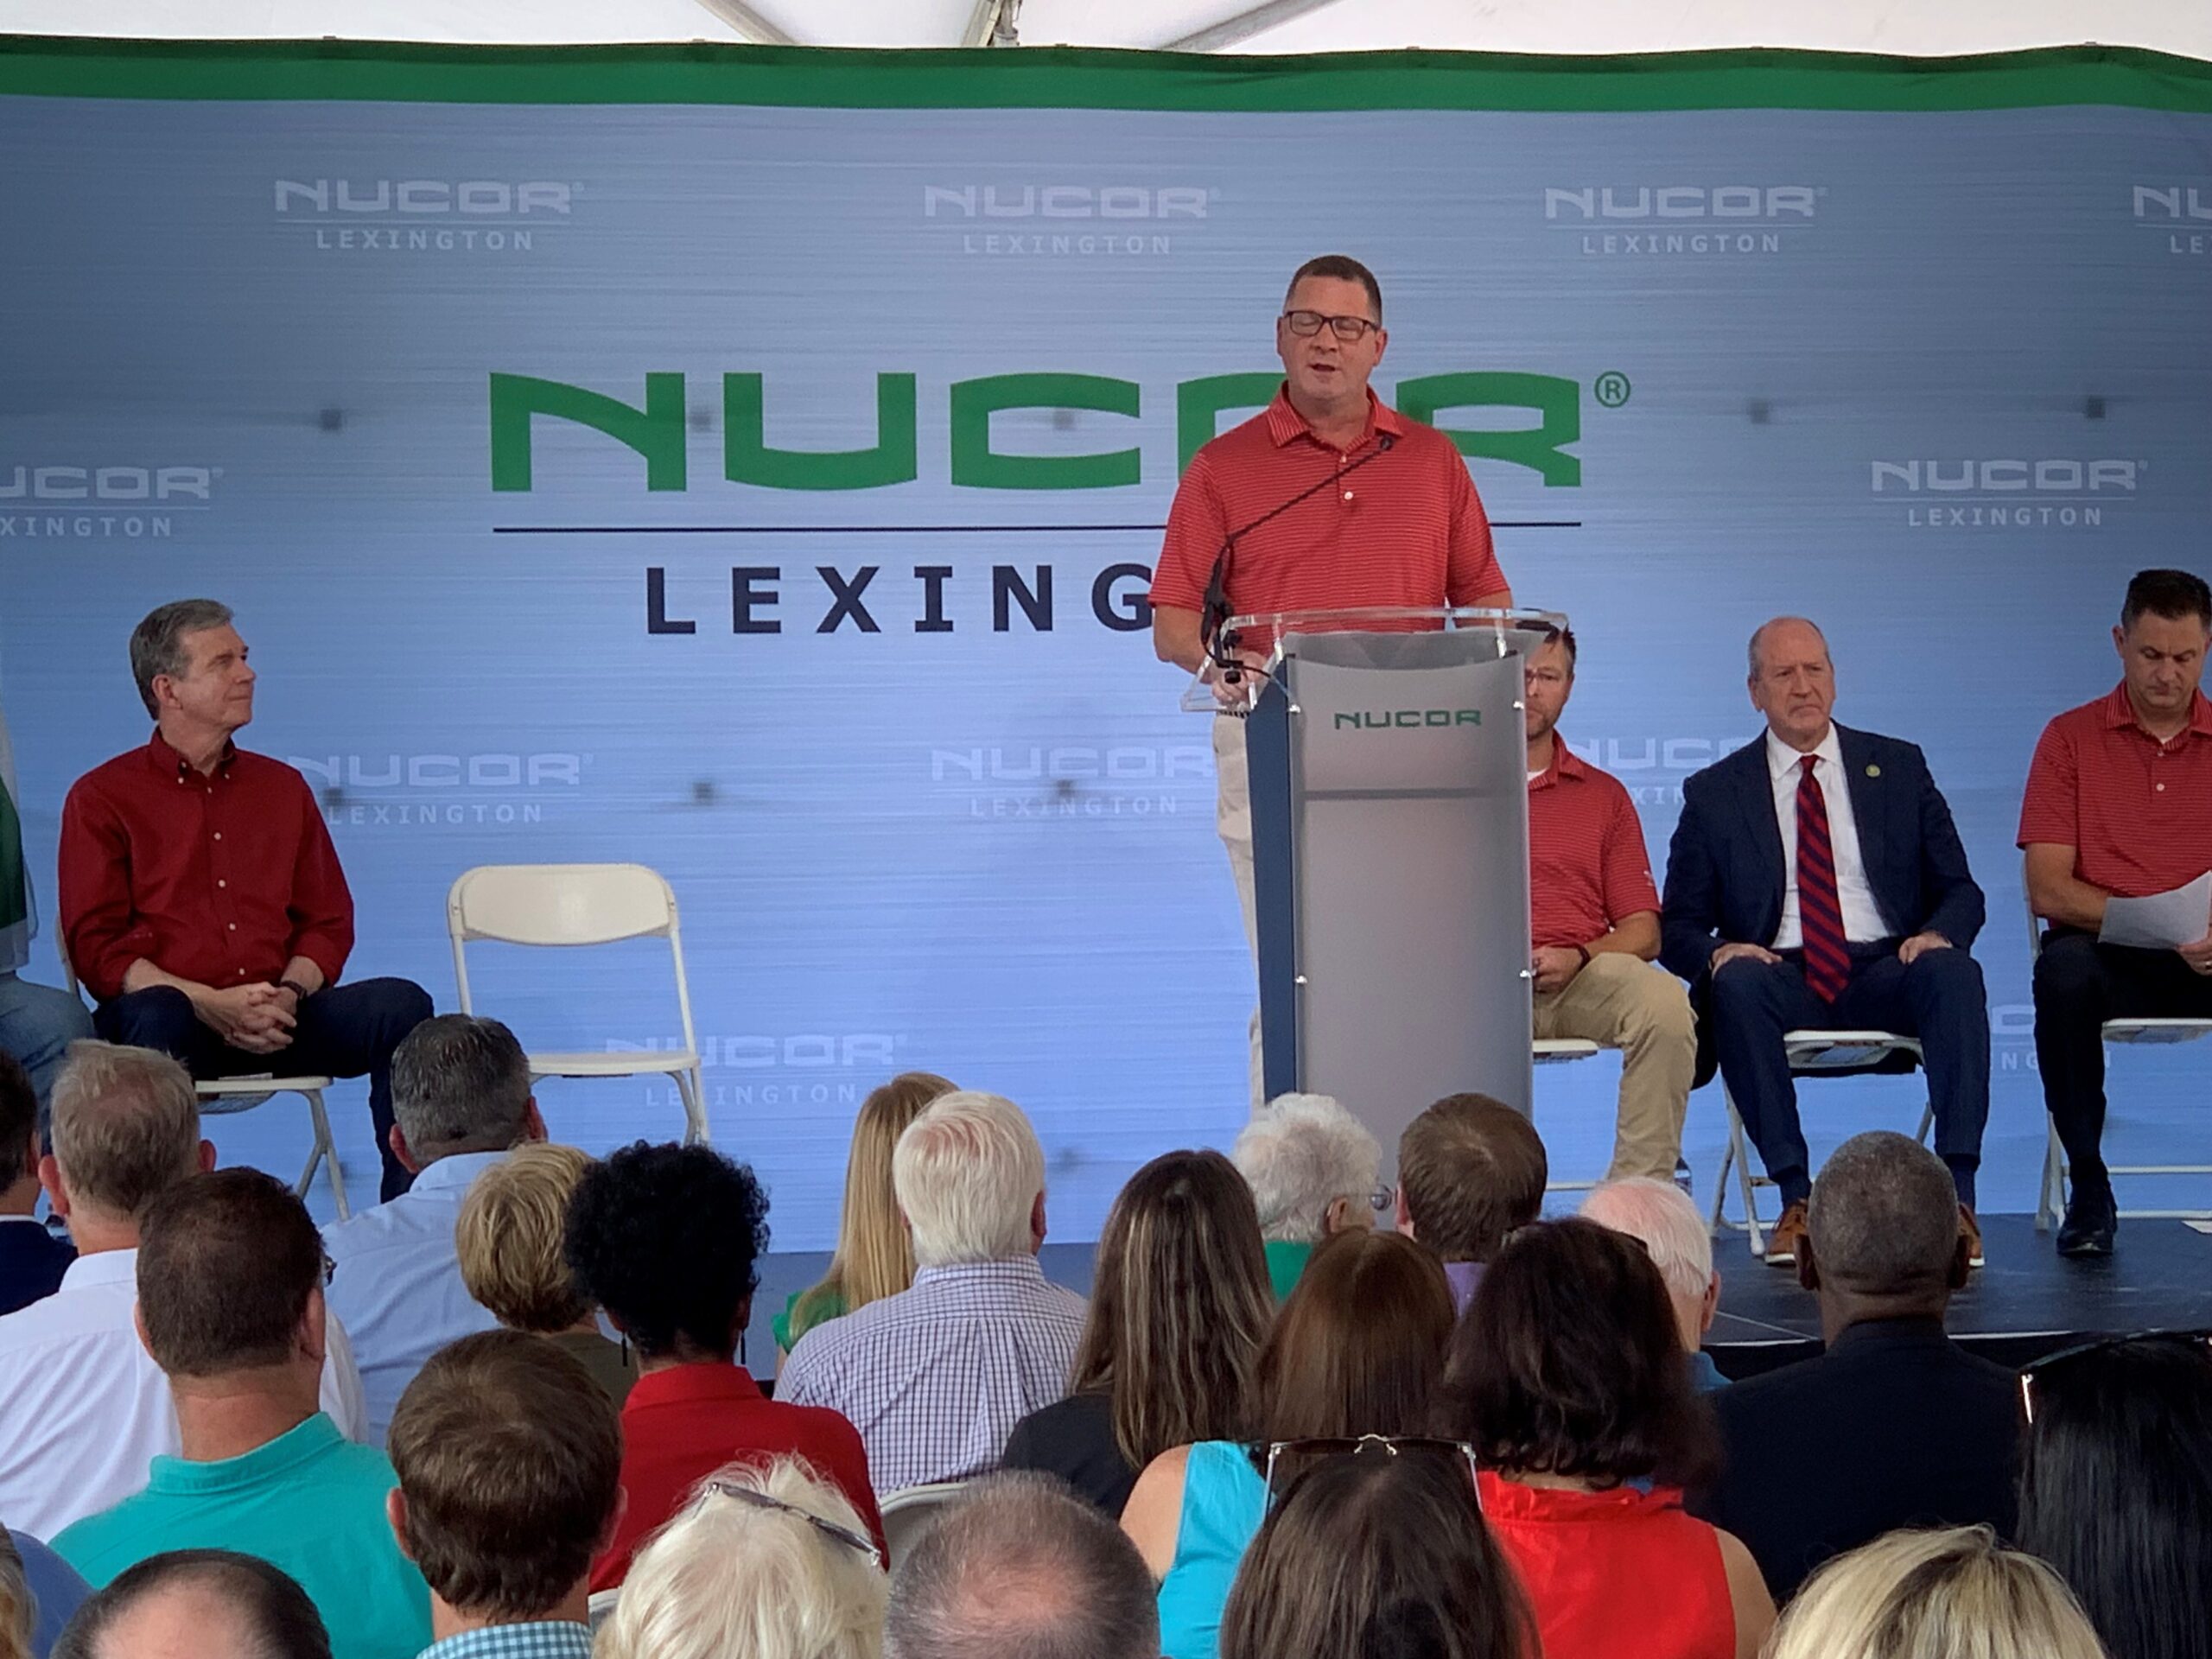 NUCOR's President and CEO, Leon Topalian gives a speech at NUCOR's ground breaking ceremony in Lexington.